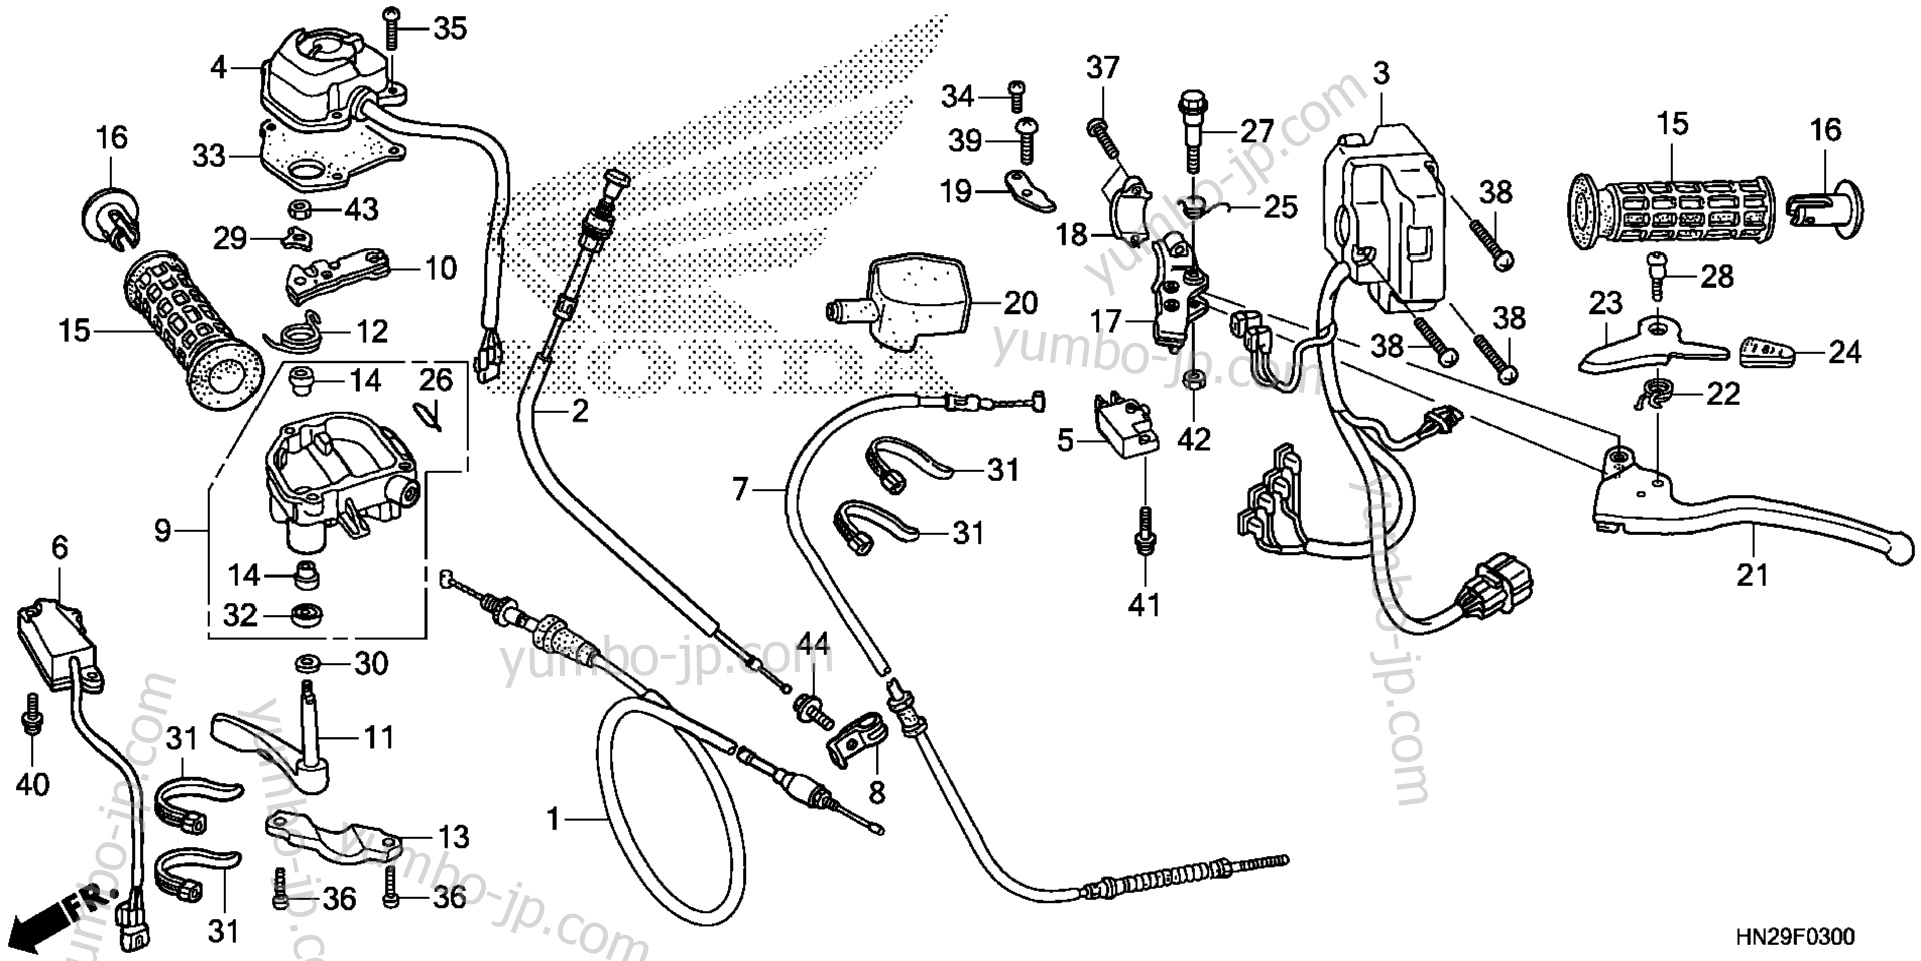 HANDLE LEVER / SWITCH / CABLE for ATVs HONDA TRX500FA 2AC 2013 year